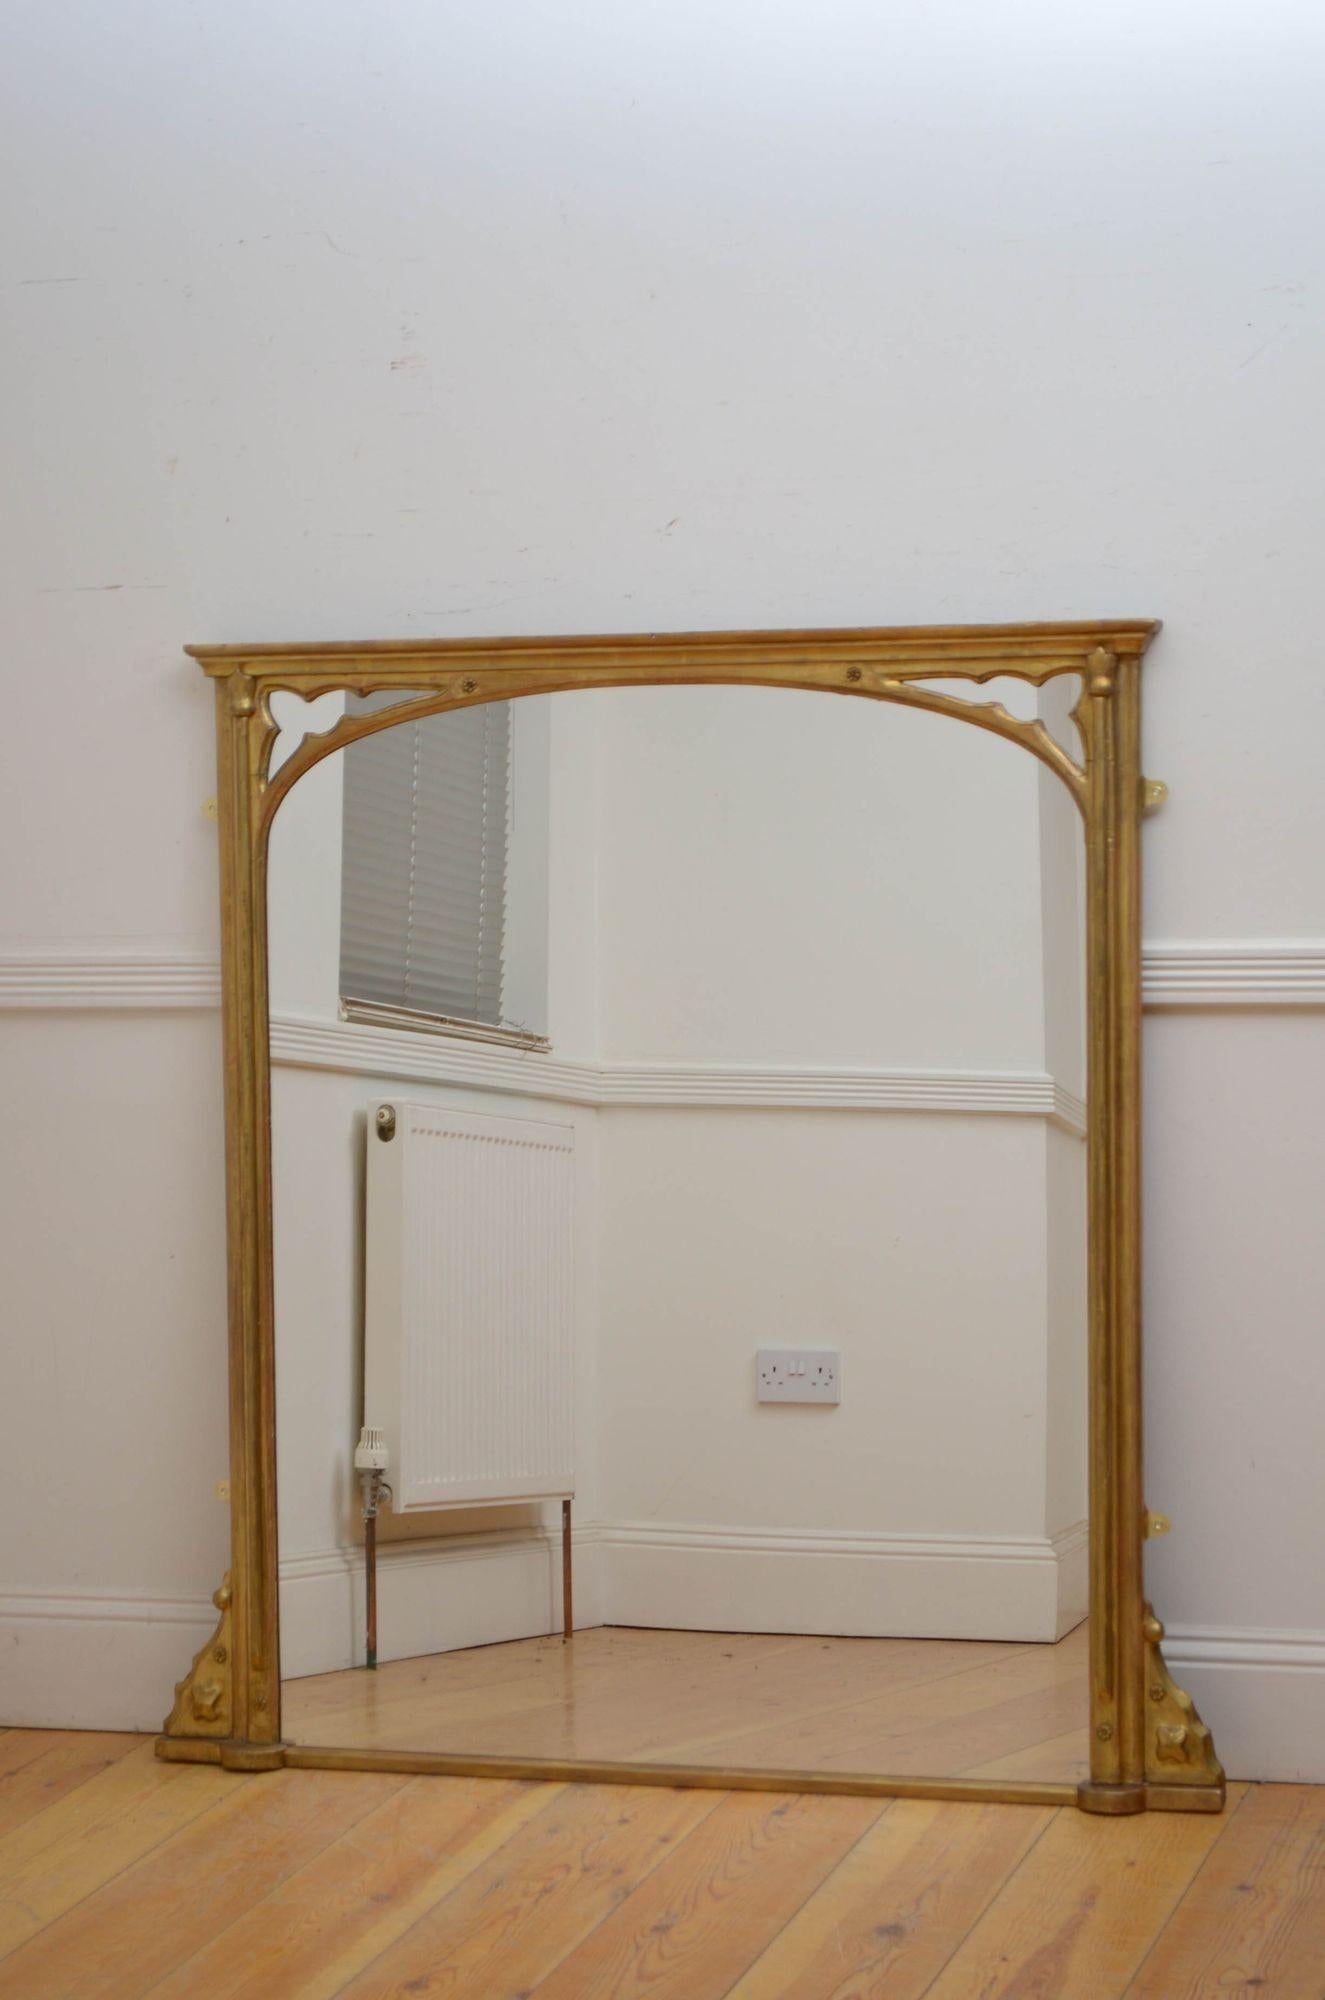 St021 Victorian Reformed Gothic gilded wall mirror, having replacement glass in moulded and gilded frame with Gothic design decorative motifs. All in home ready condition. c1880
H50.5